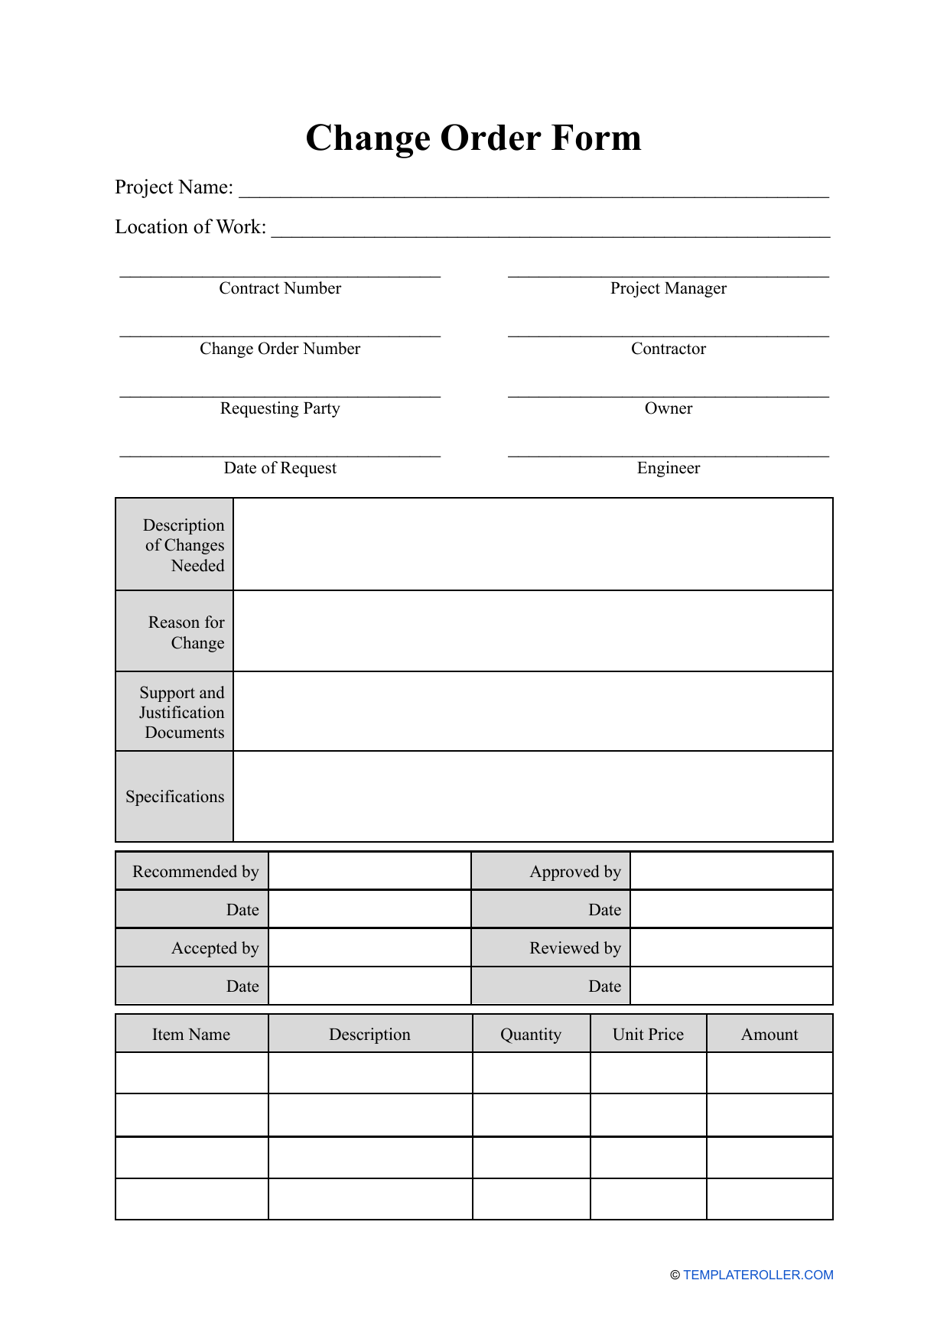 Change Order Form Template - Fill Out, Sign Online and Download PDF ...